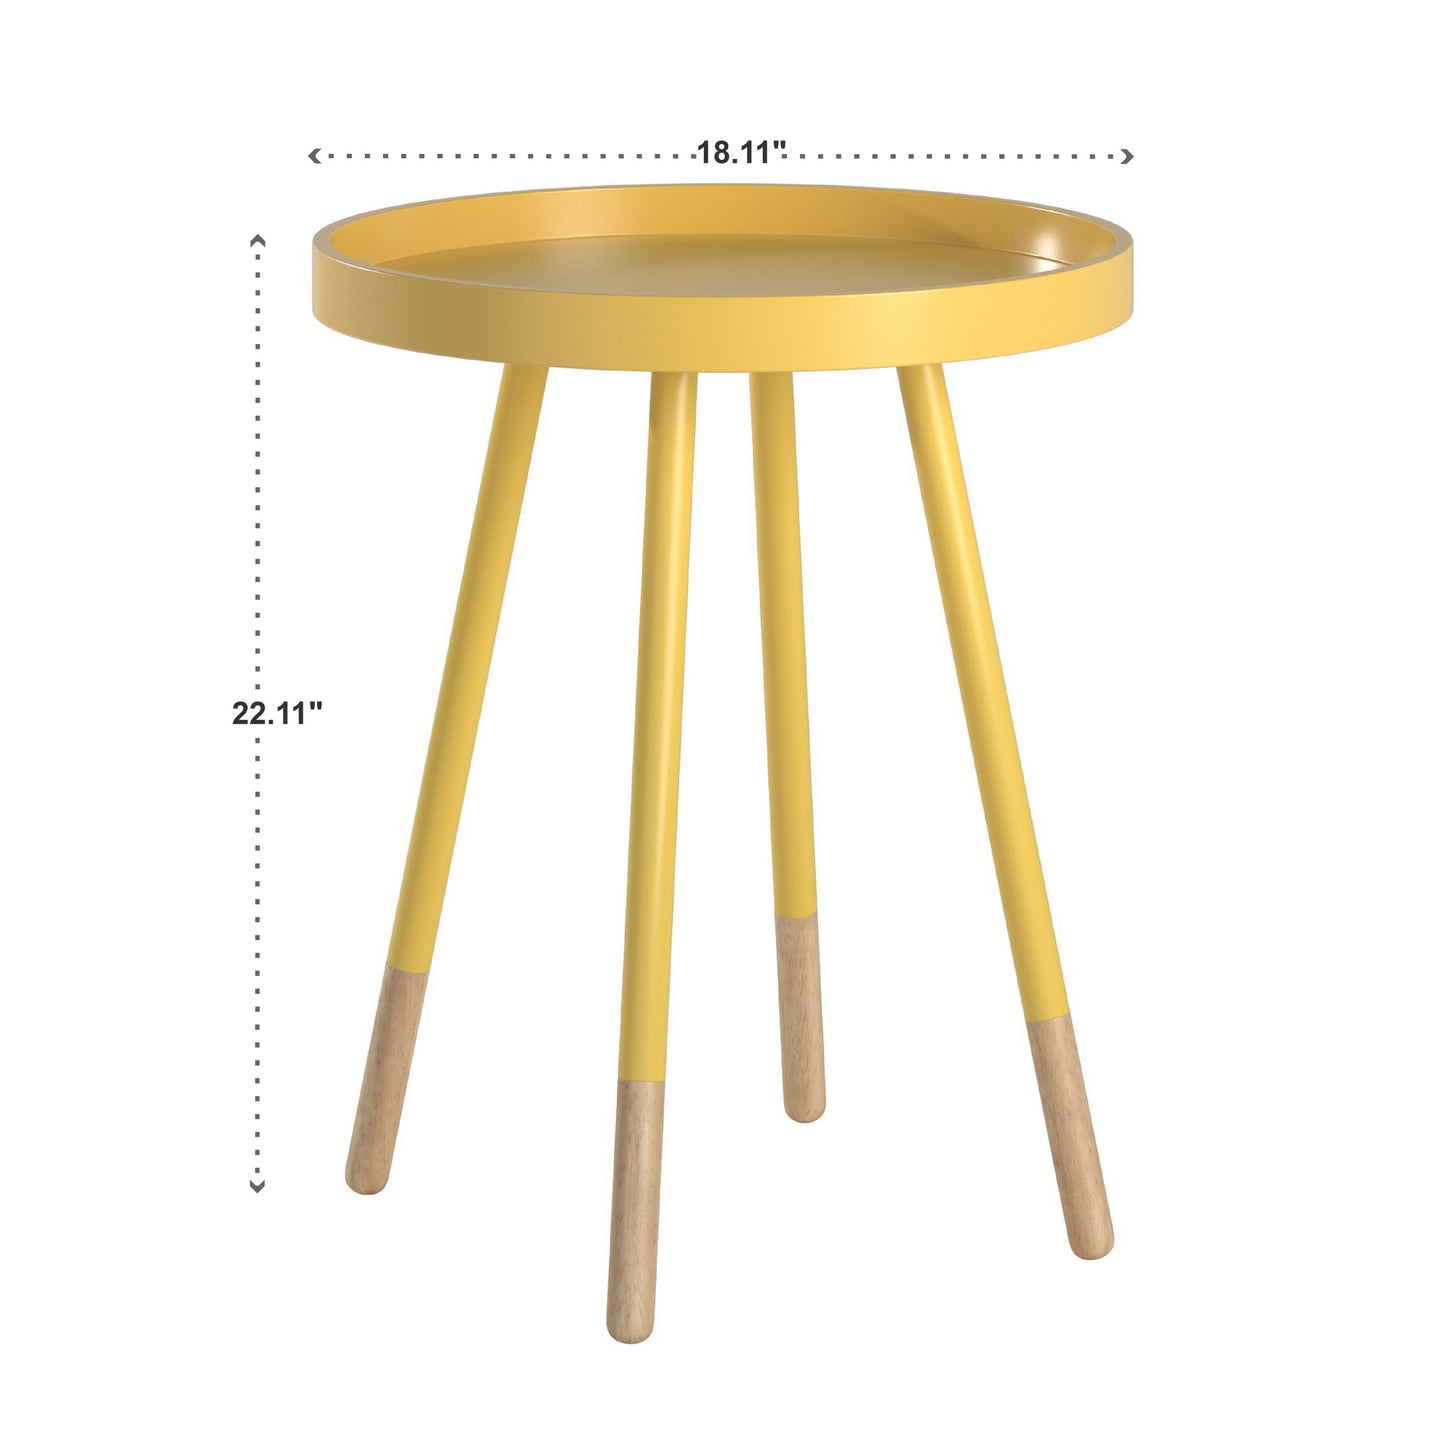 Paint-Dipped Round Tray-Top End Table - Banana Yellow